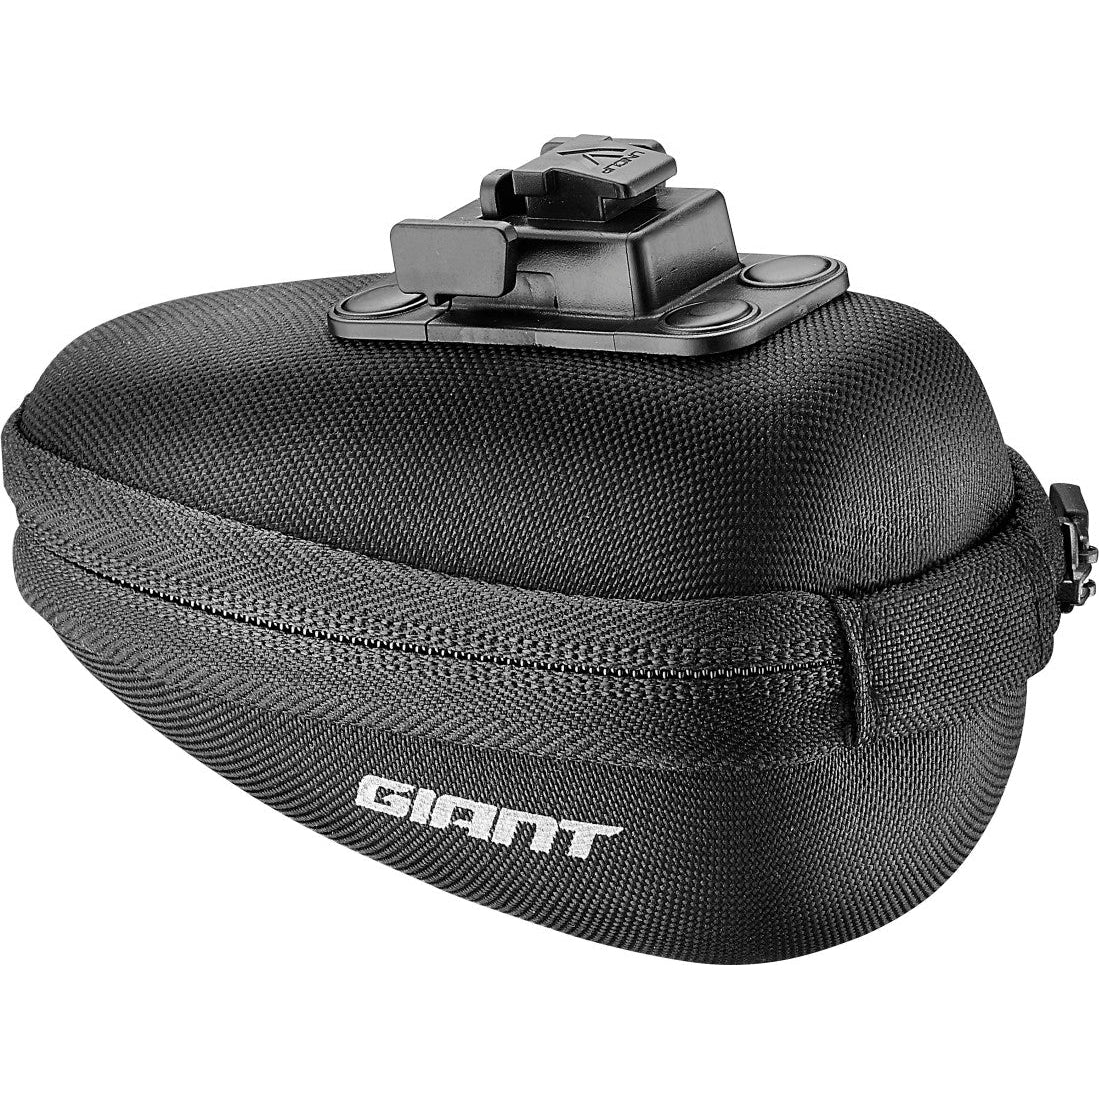 Giant Uniclip Seat Bag - Bags - Bicycle Warehouse